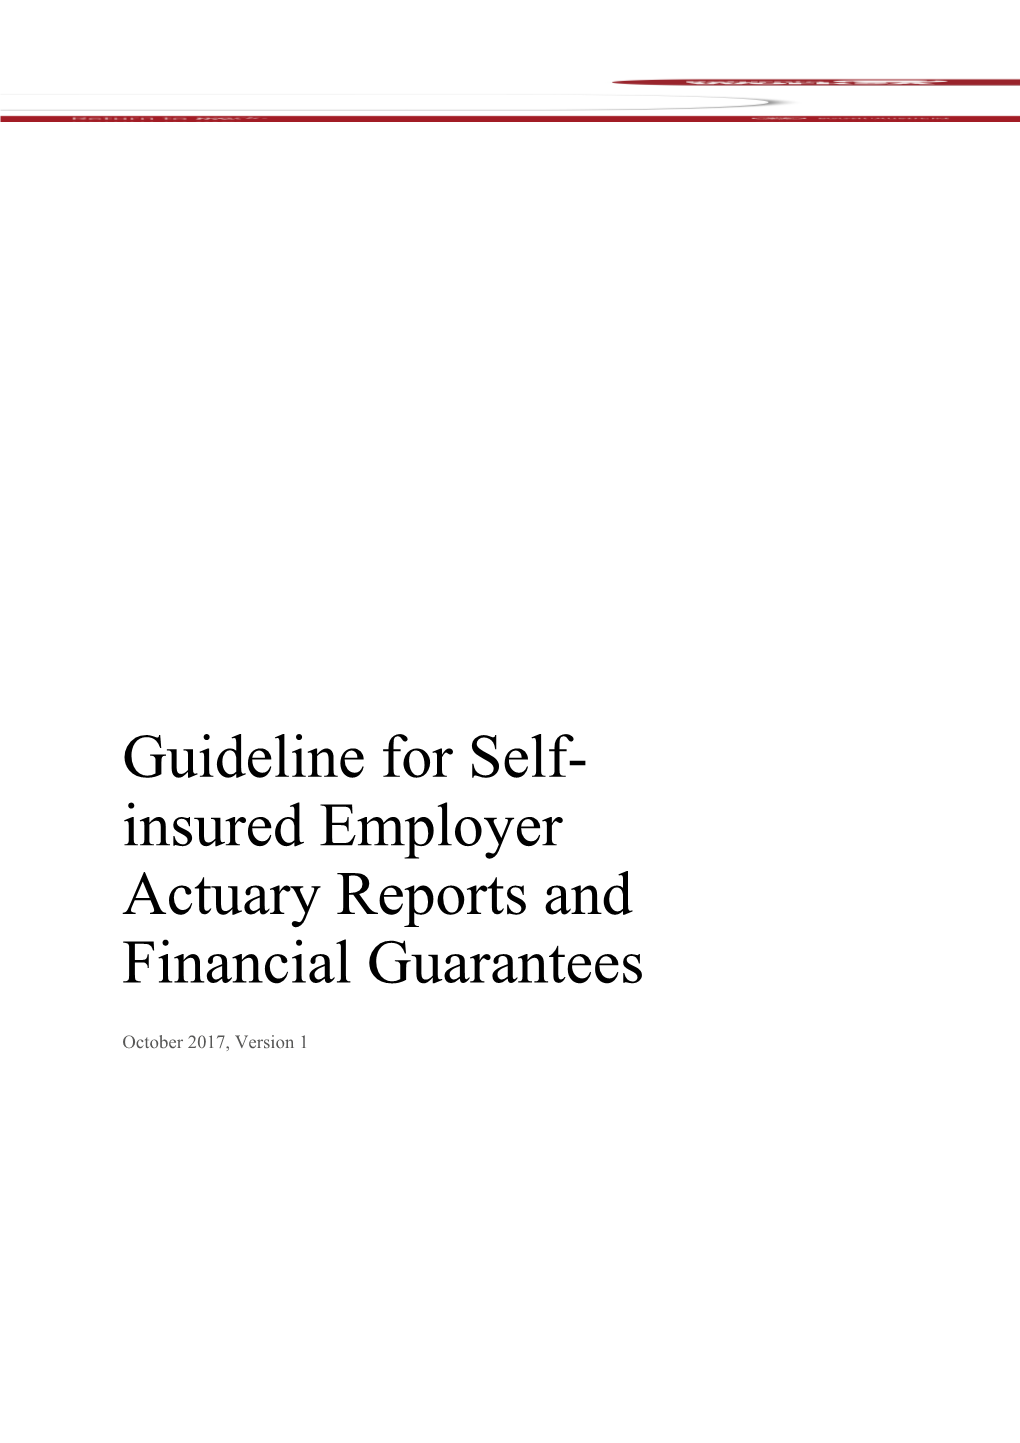 Guideline For Self-Insured Employer Actuary Reports And Financial Guarantees